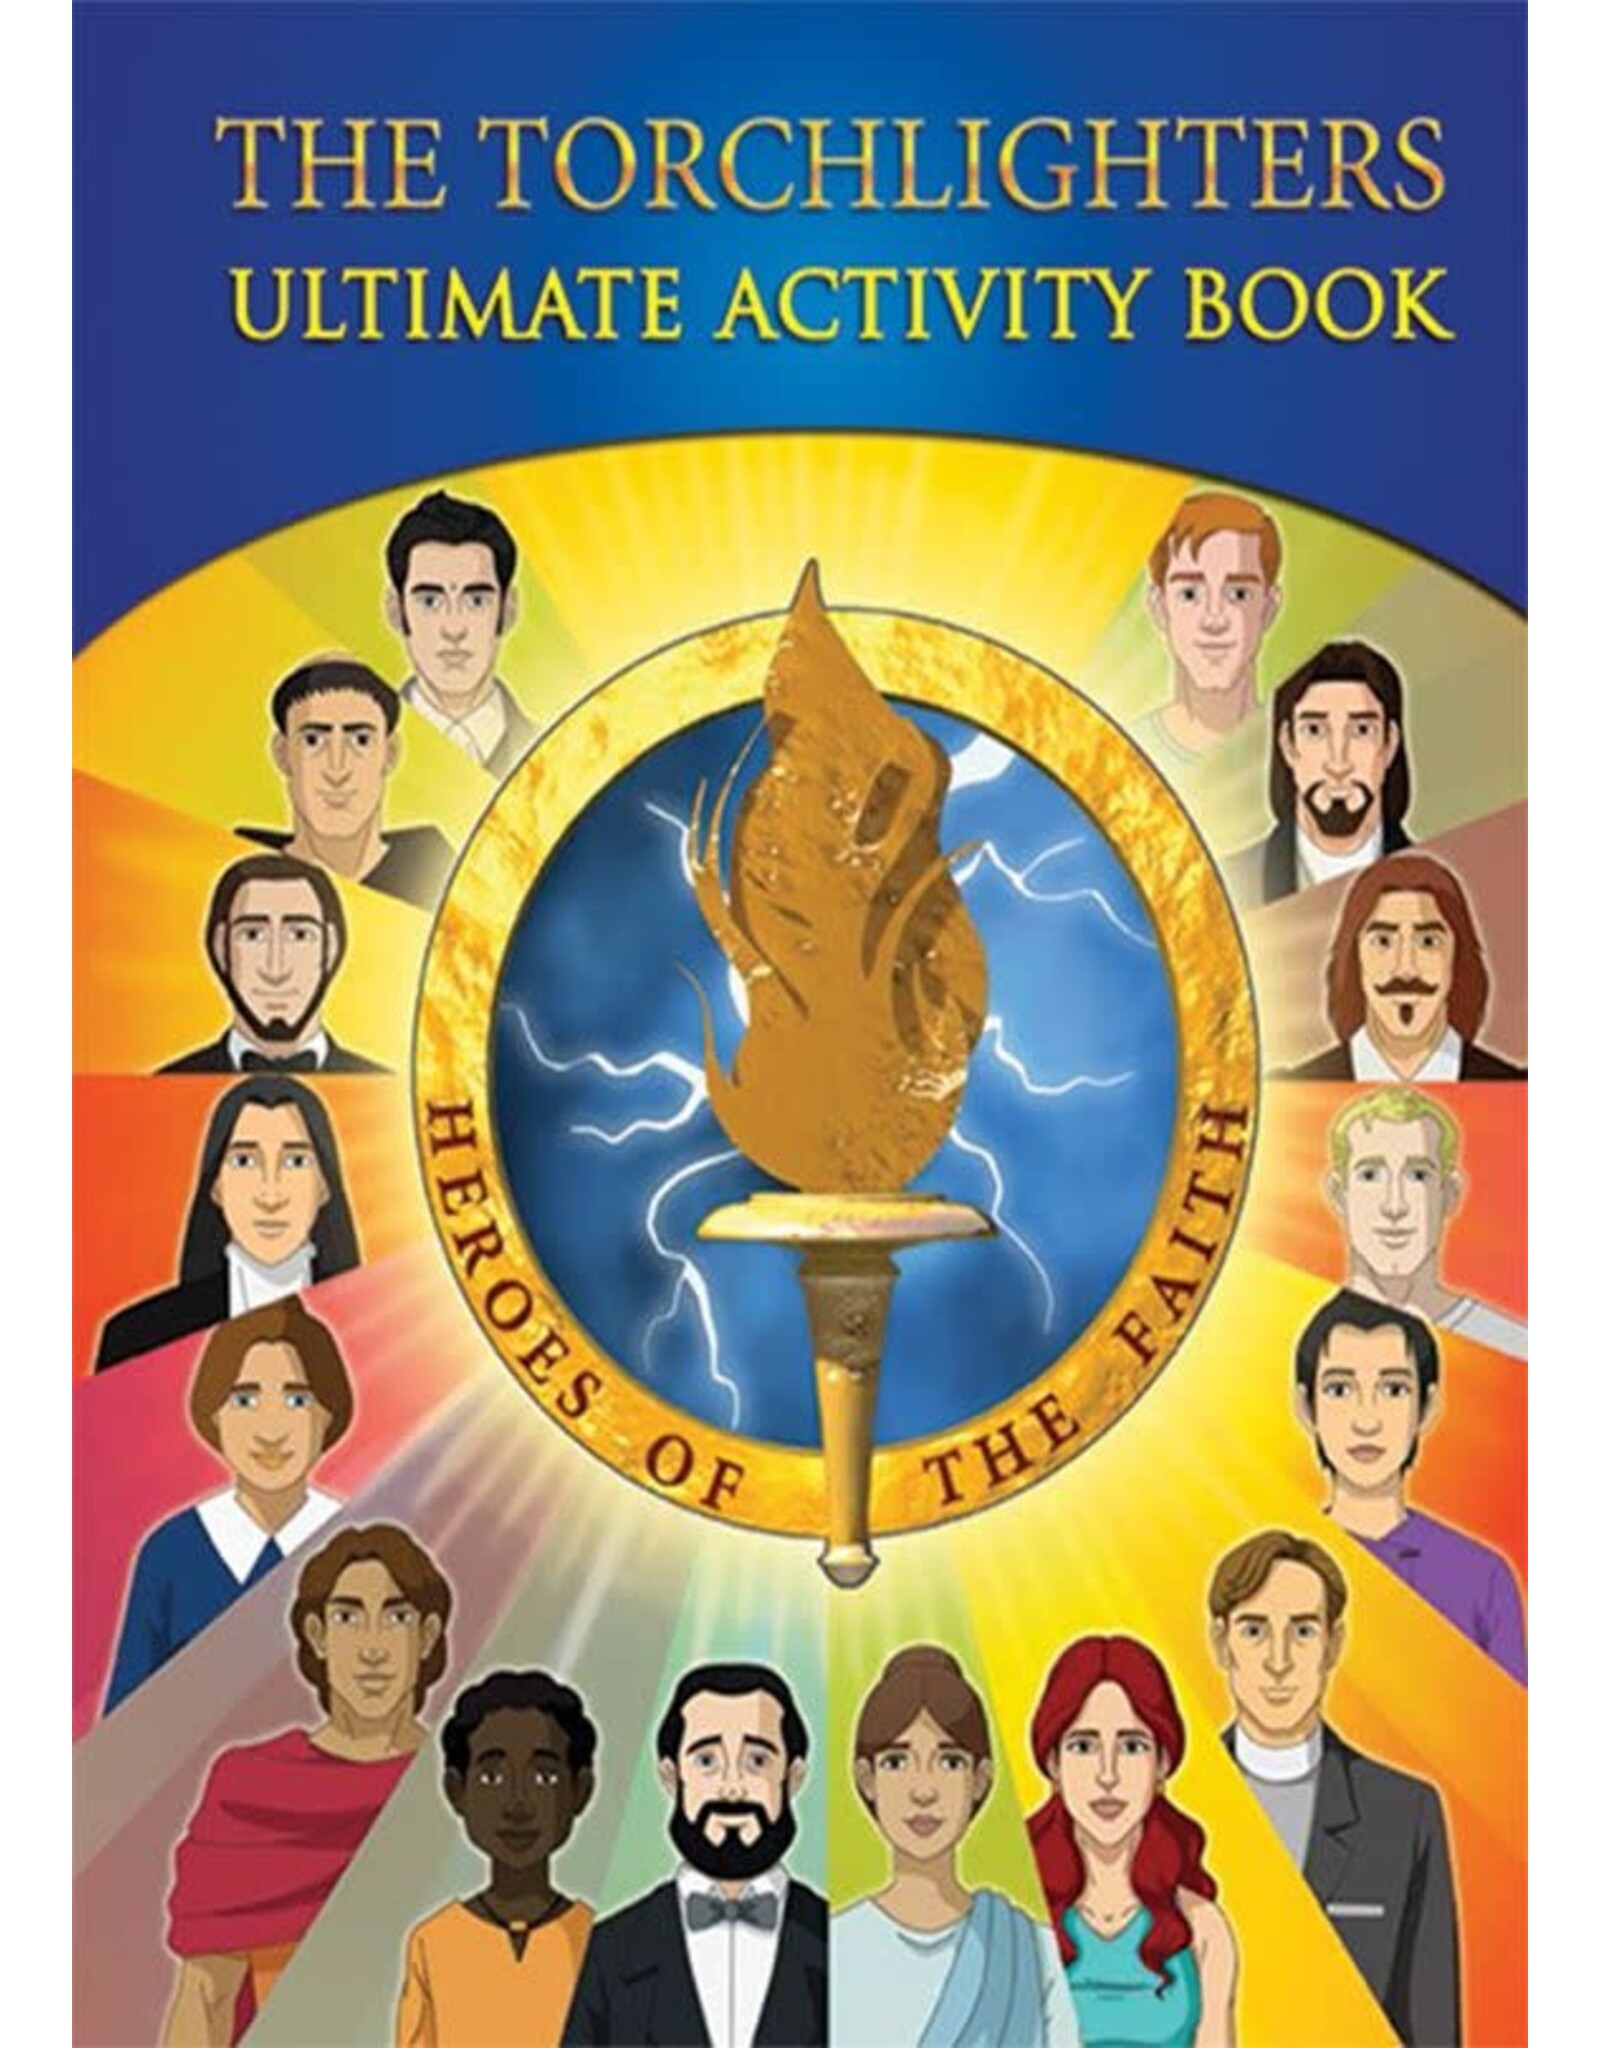 Torchlighters Ultimate Activity Book